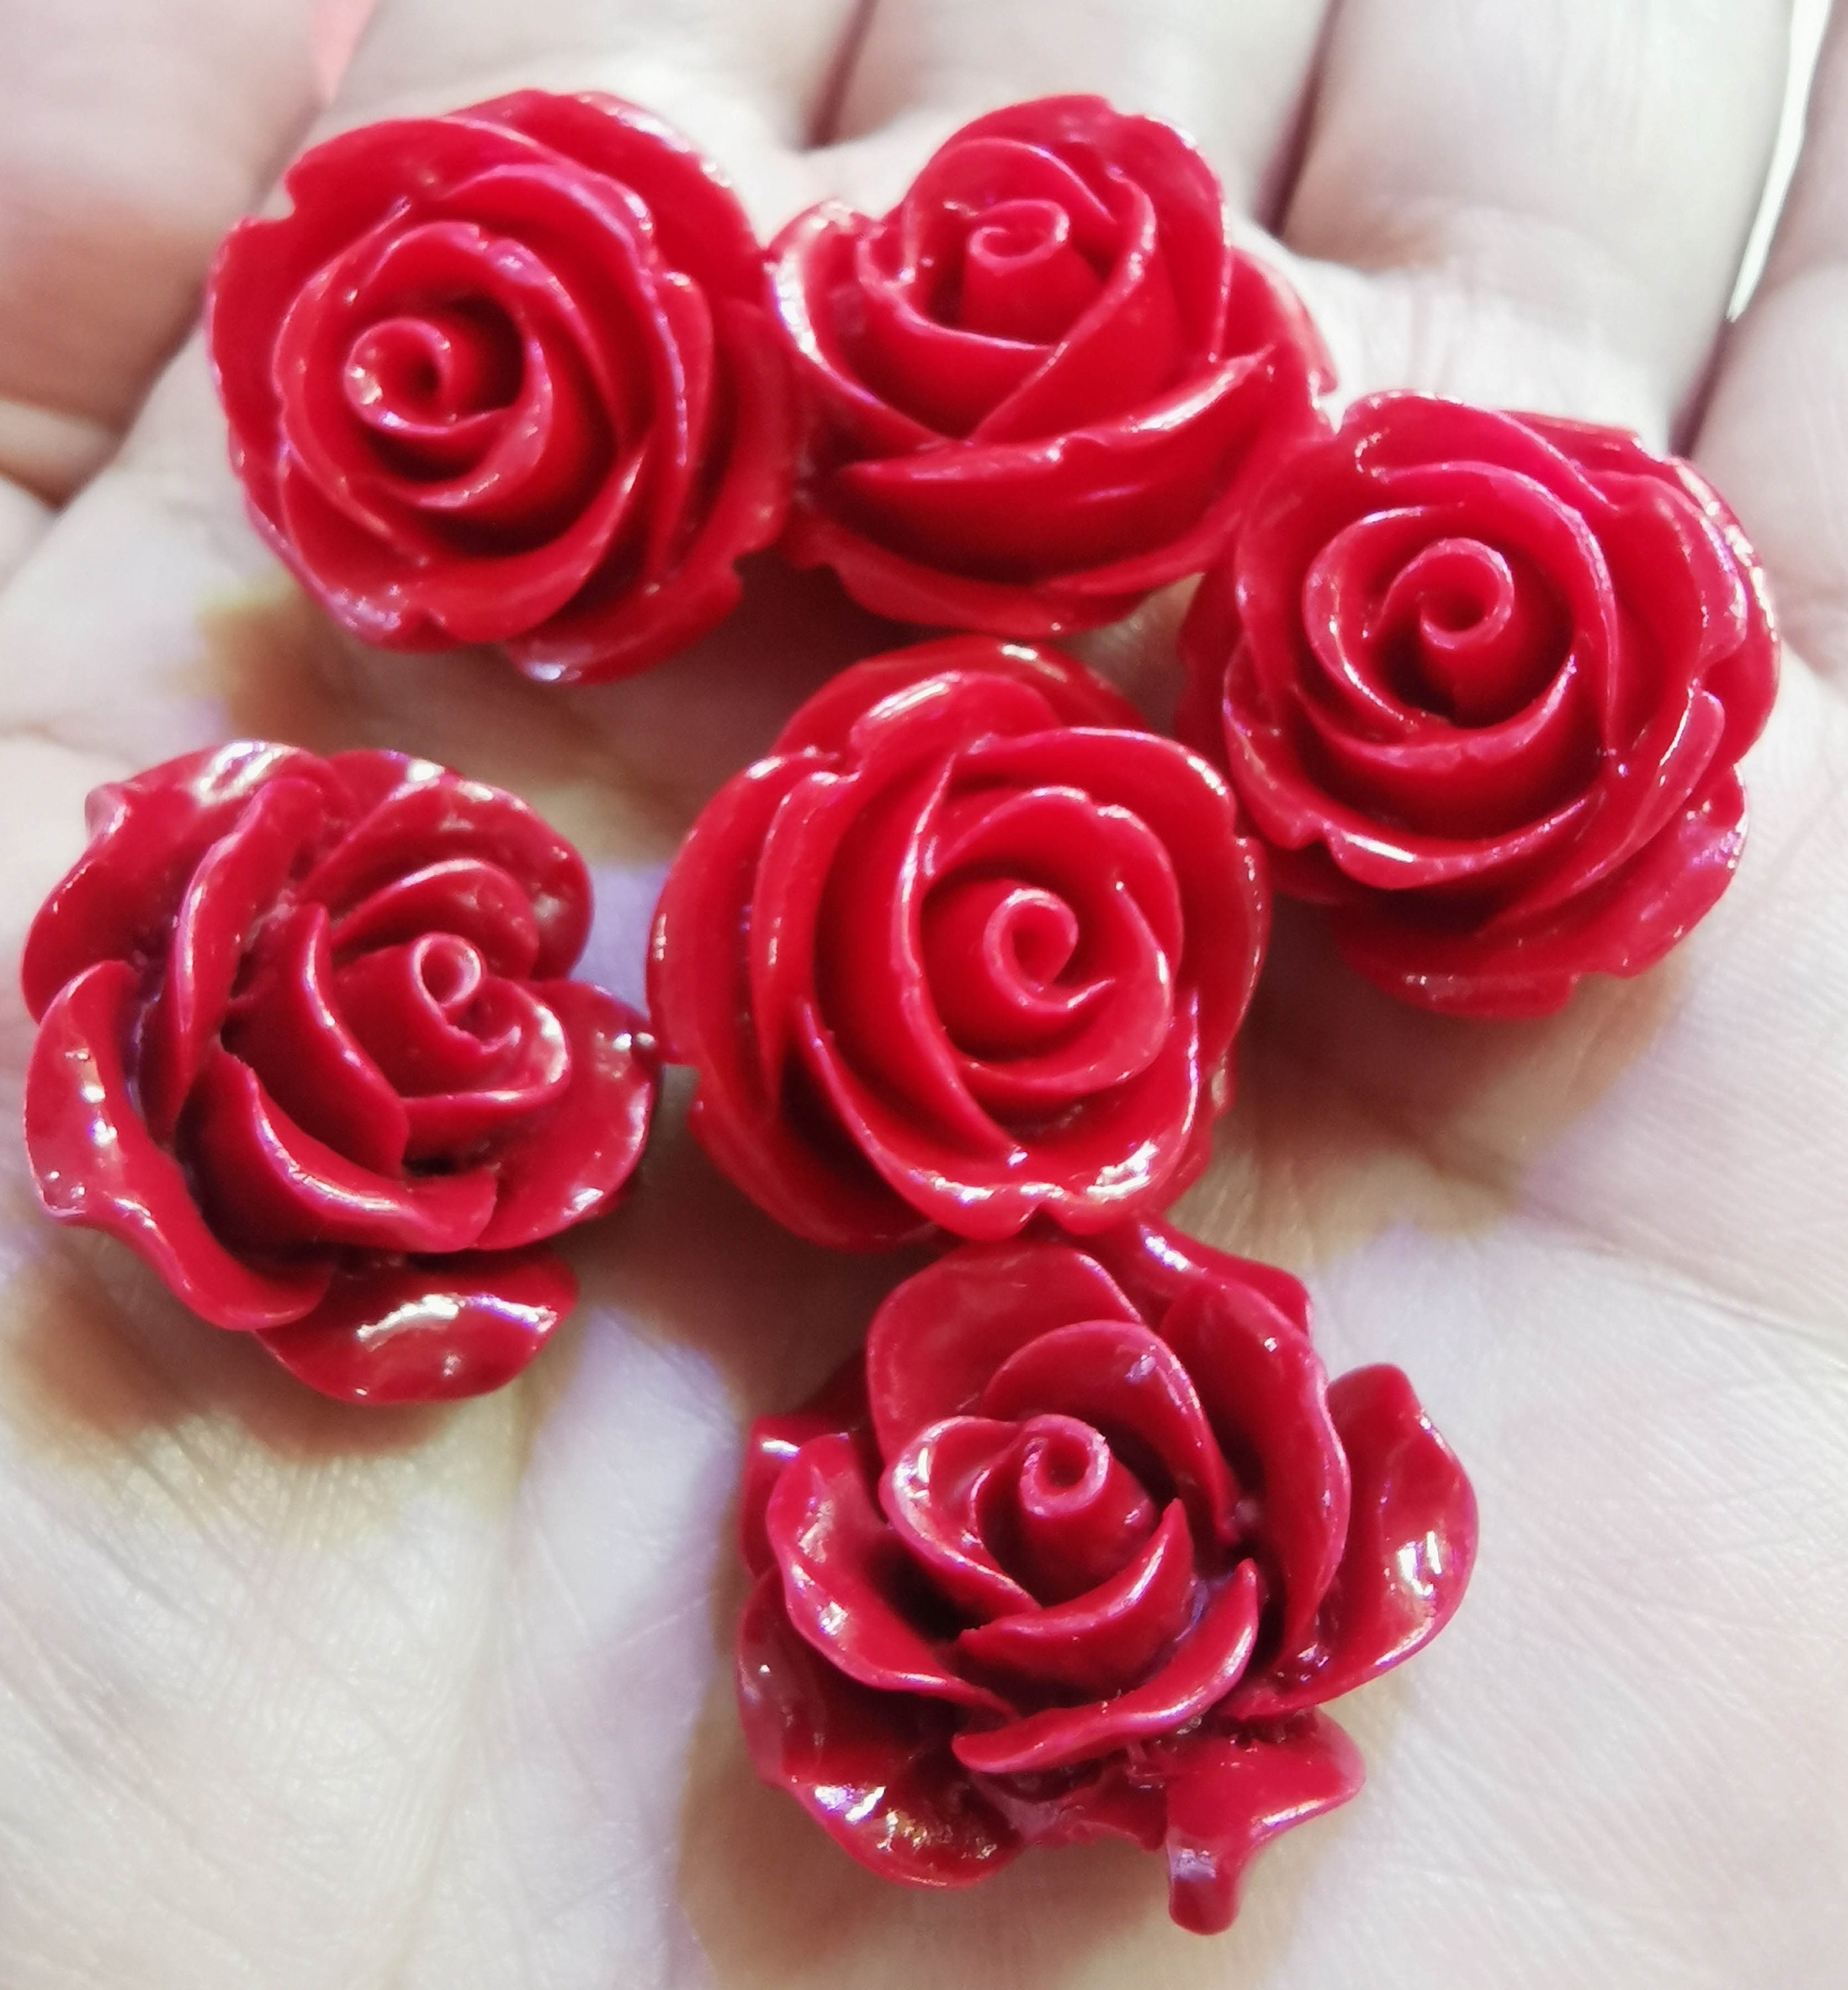  SEWACC 200 Pcs Rose Loose Beads Earring Making Beads Red Beads  for Jewelry Making Red Flower Beads Rose Prayer Beads Rose Beads Floral  Jewelry DIY Craft Beads Coral Beads Lotus 